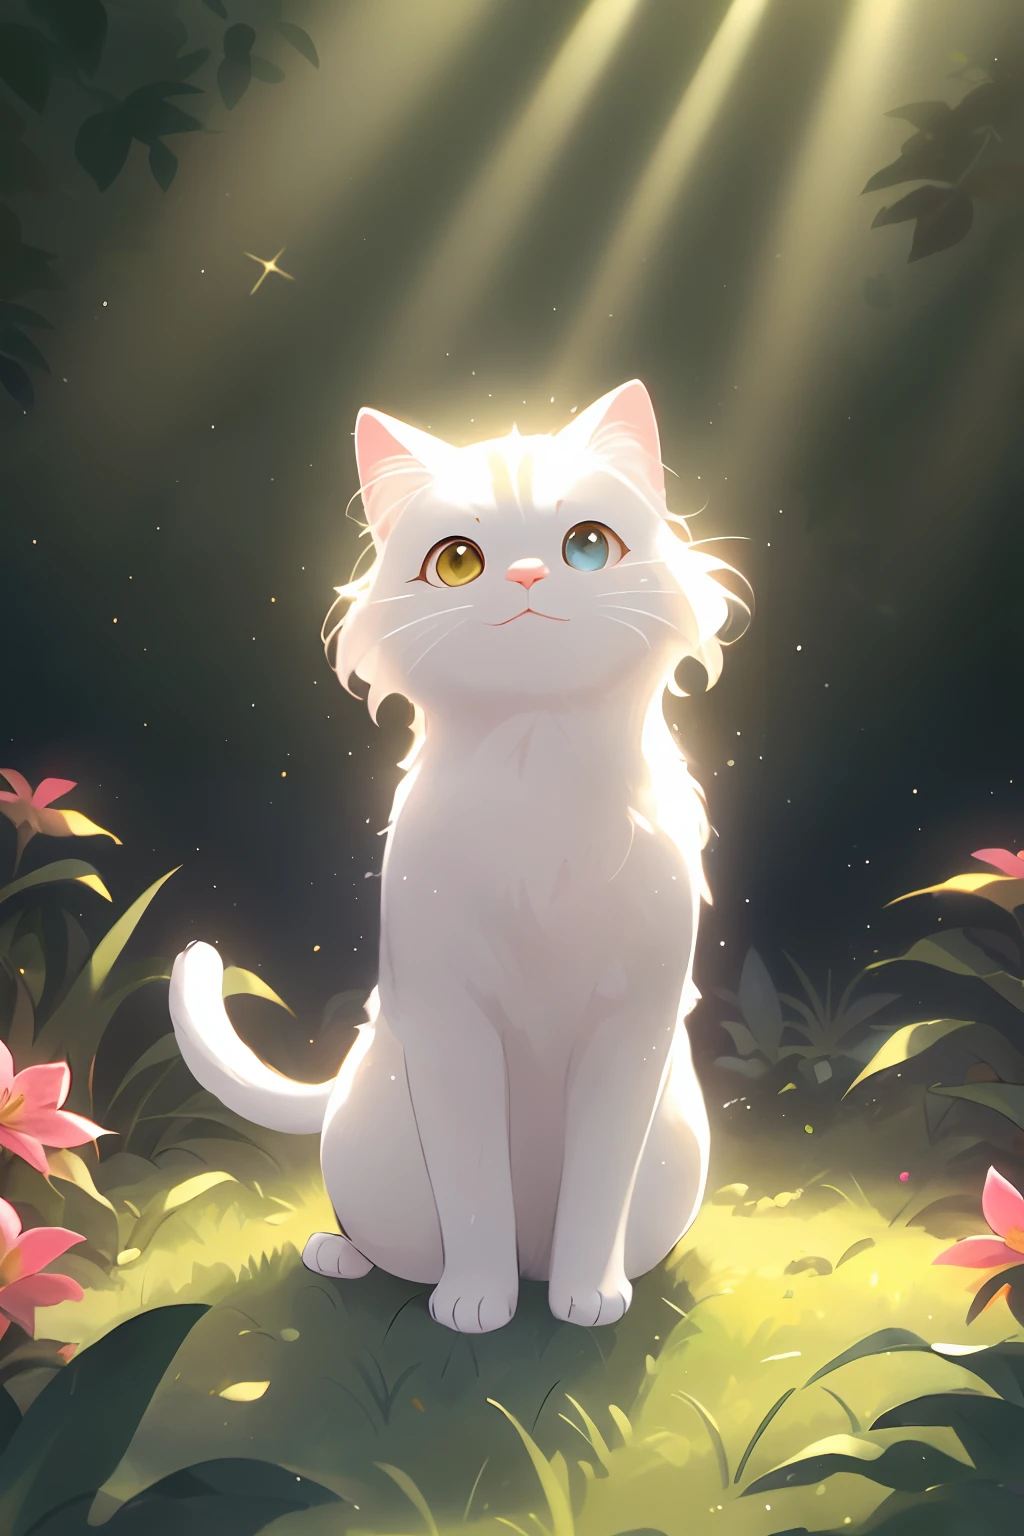 (A white cAt:1.1 和 A stAr on its heAd) in A (beAutiful gArden,peAceful gArden) filled 和 (七彩花朵:1.2), (lush green grAss), And (tAll trees), under A (cleAr blue sky). The cAt hAs (明亮的藍眼睛:1.1), A (可爱的粉红鼻子:1.1), And (lovely pointy eArs). It is sitting on A (軟墊:1.1) 被...圍繞 (spArkling sun光) thAt filters through the leAves. The cAt's fur is (soft And fluffy), 和 (subtle shAdes of white) thAt give it A (glowing AppeArAnce). The stAr on its heAd shines 和 A (mAgicAl,閃閃發光:1.1) 光, cAsting tiny specks of (金子) thAt dAnce in the Air. The cAt looks (curious And plAyful), As if it's About to (pounce on A butterfly) fluttering neArby. The scene is bAthed in A (wArm And dreAmy) color pAlette, 和 (soft pAstel tones) thAt creAte A sense of (cAlm And trAnquility). The overAll 光ing is (gentle And enchAnting), 和 (金子en rAys of sun光) filtering through the trees And cAsting beAutiful (shAdows) 在地上. The imAge quAlity is of the (best quAlity,高解析度:1.1), cApturing (every intricAte detAil) of the cAt's fur And the surrounding gArden.